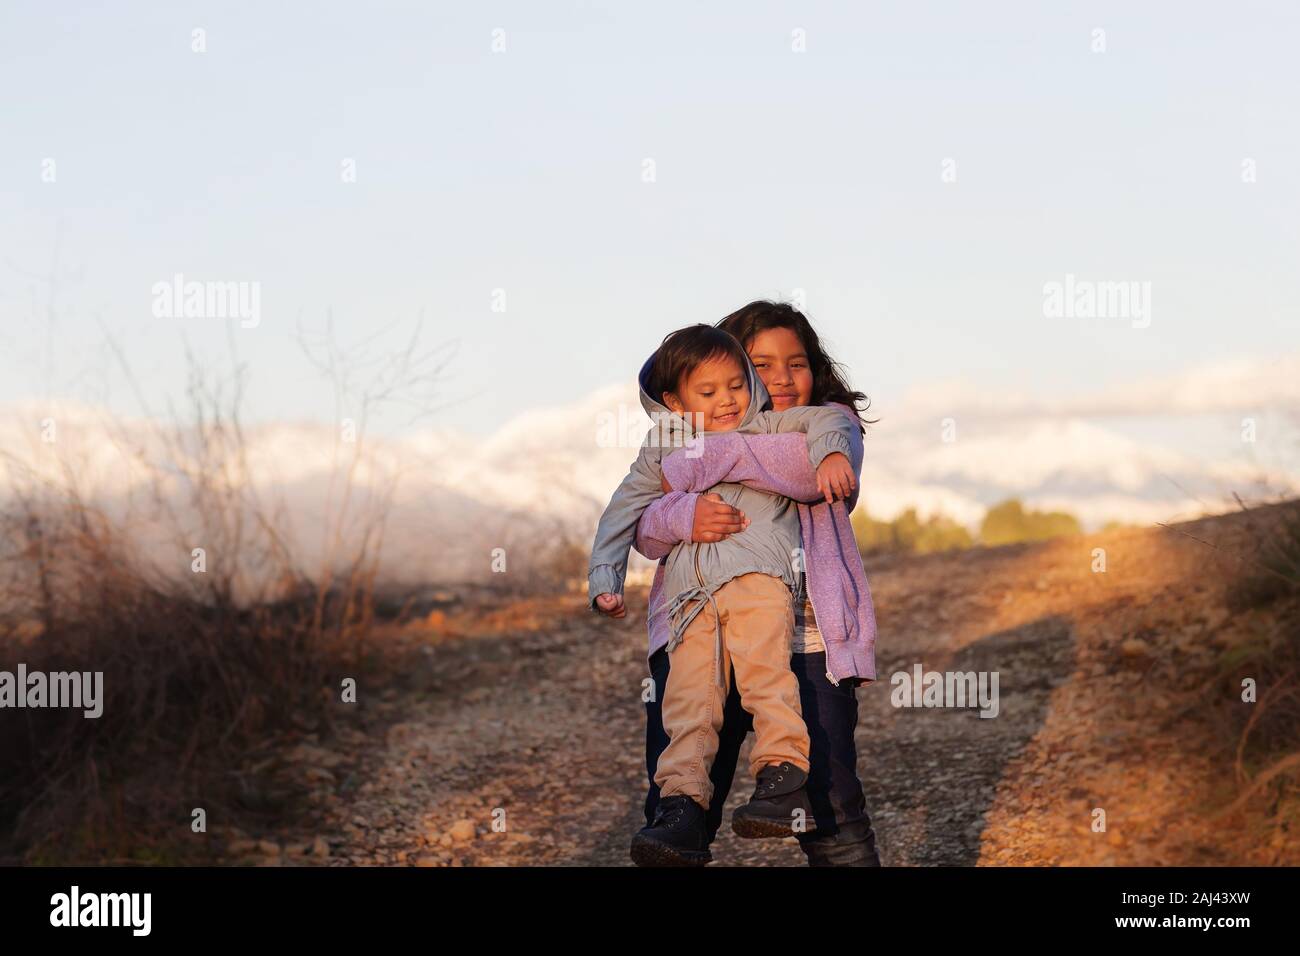 An older sister hugging and holding up her little brother while standing in the middle of a hiking trail with mountains in the background. Stock Photo